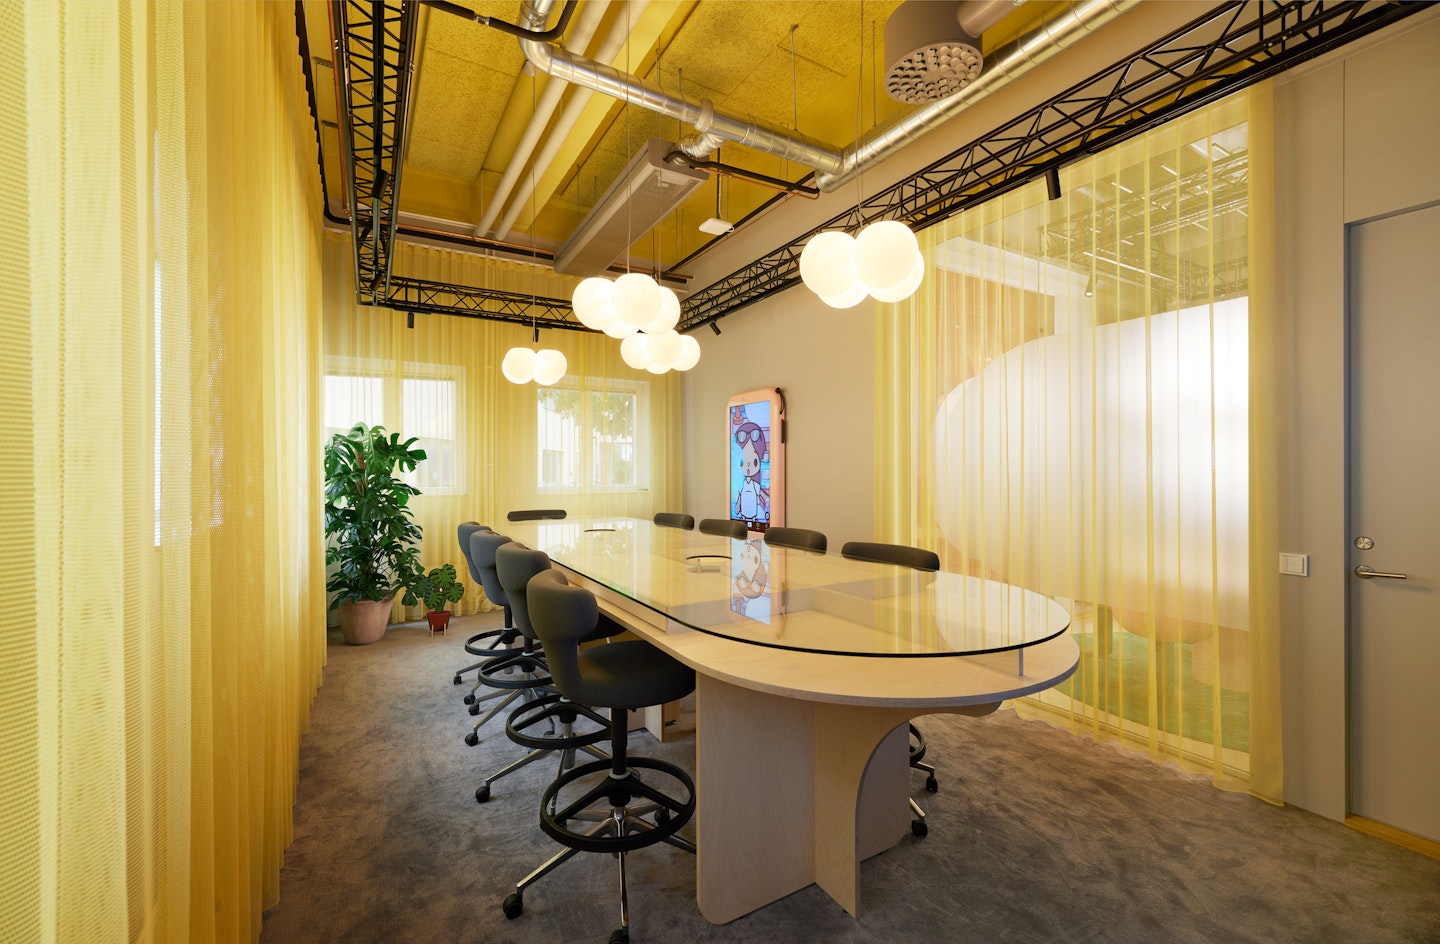 This is an image of a meeting room at Toca Boca Campus. Yellow draping curtains surround the room and with the light shining through them it gives a golden glow. The table has raised glass top.